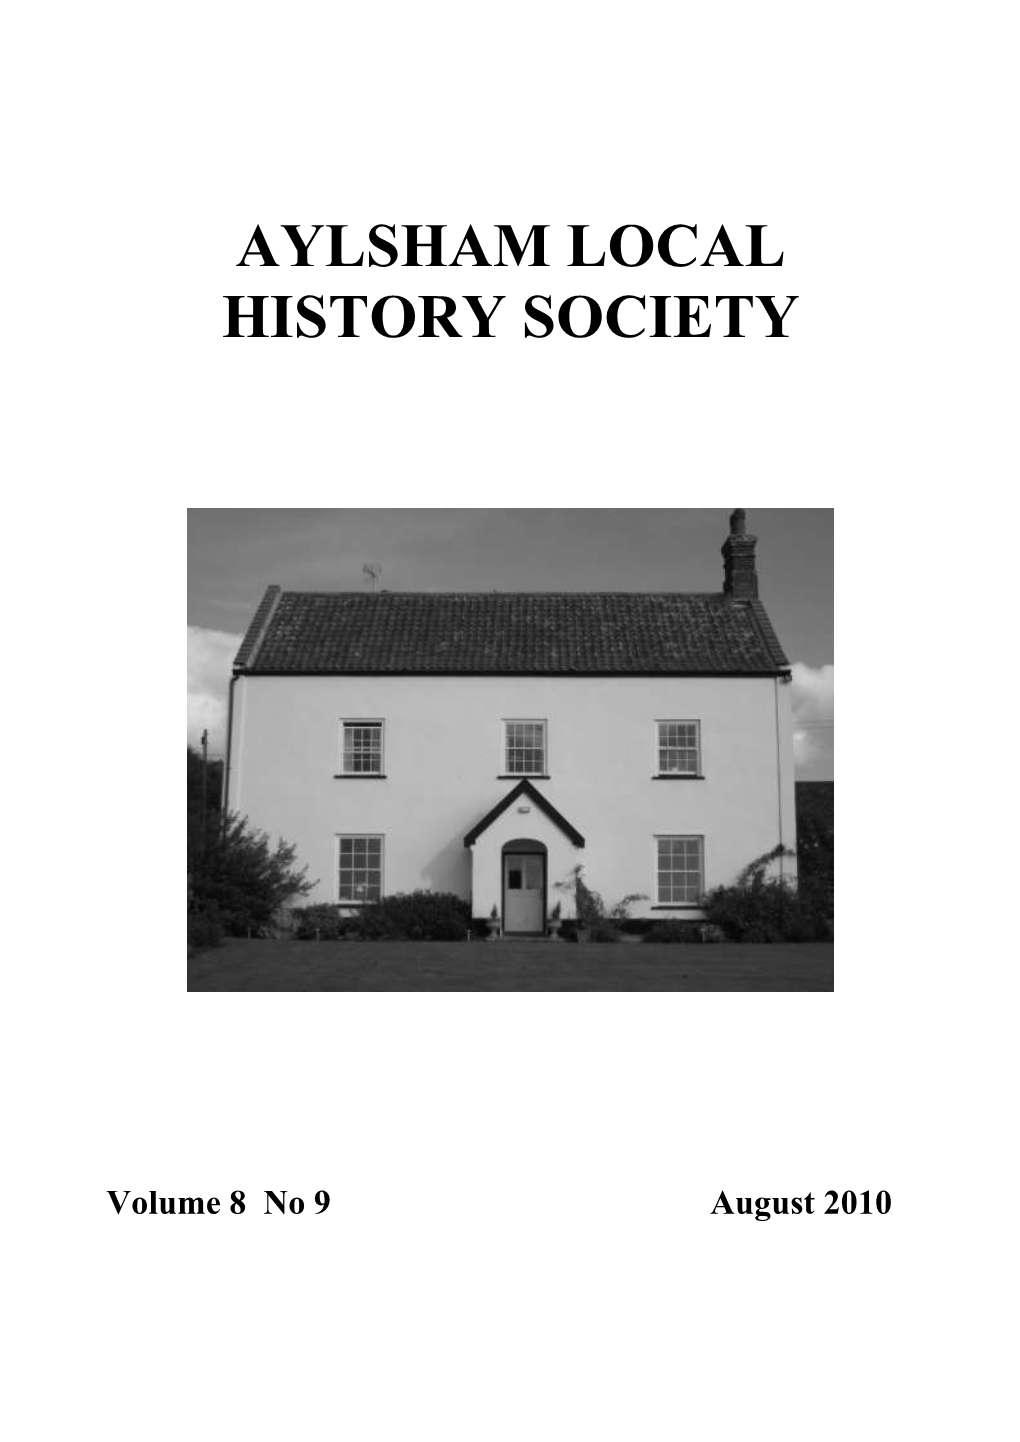 Copeman – the Evolution of a Norfolk Surname by William Vaughan-Lewis ………………………………………………………256